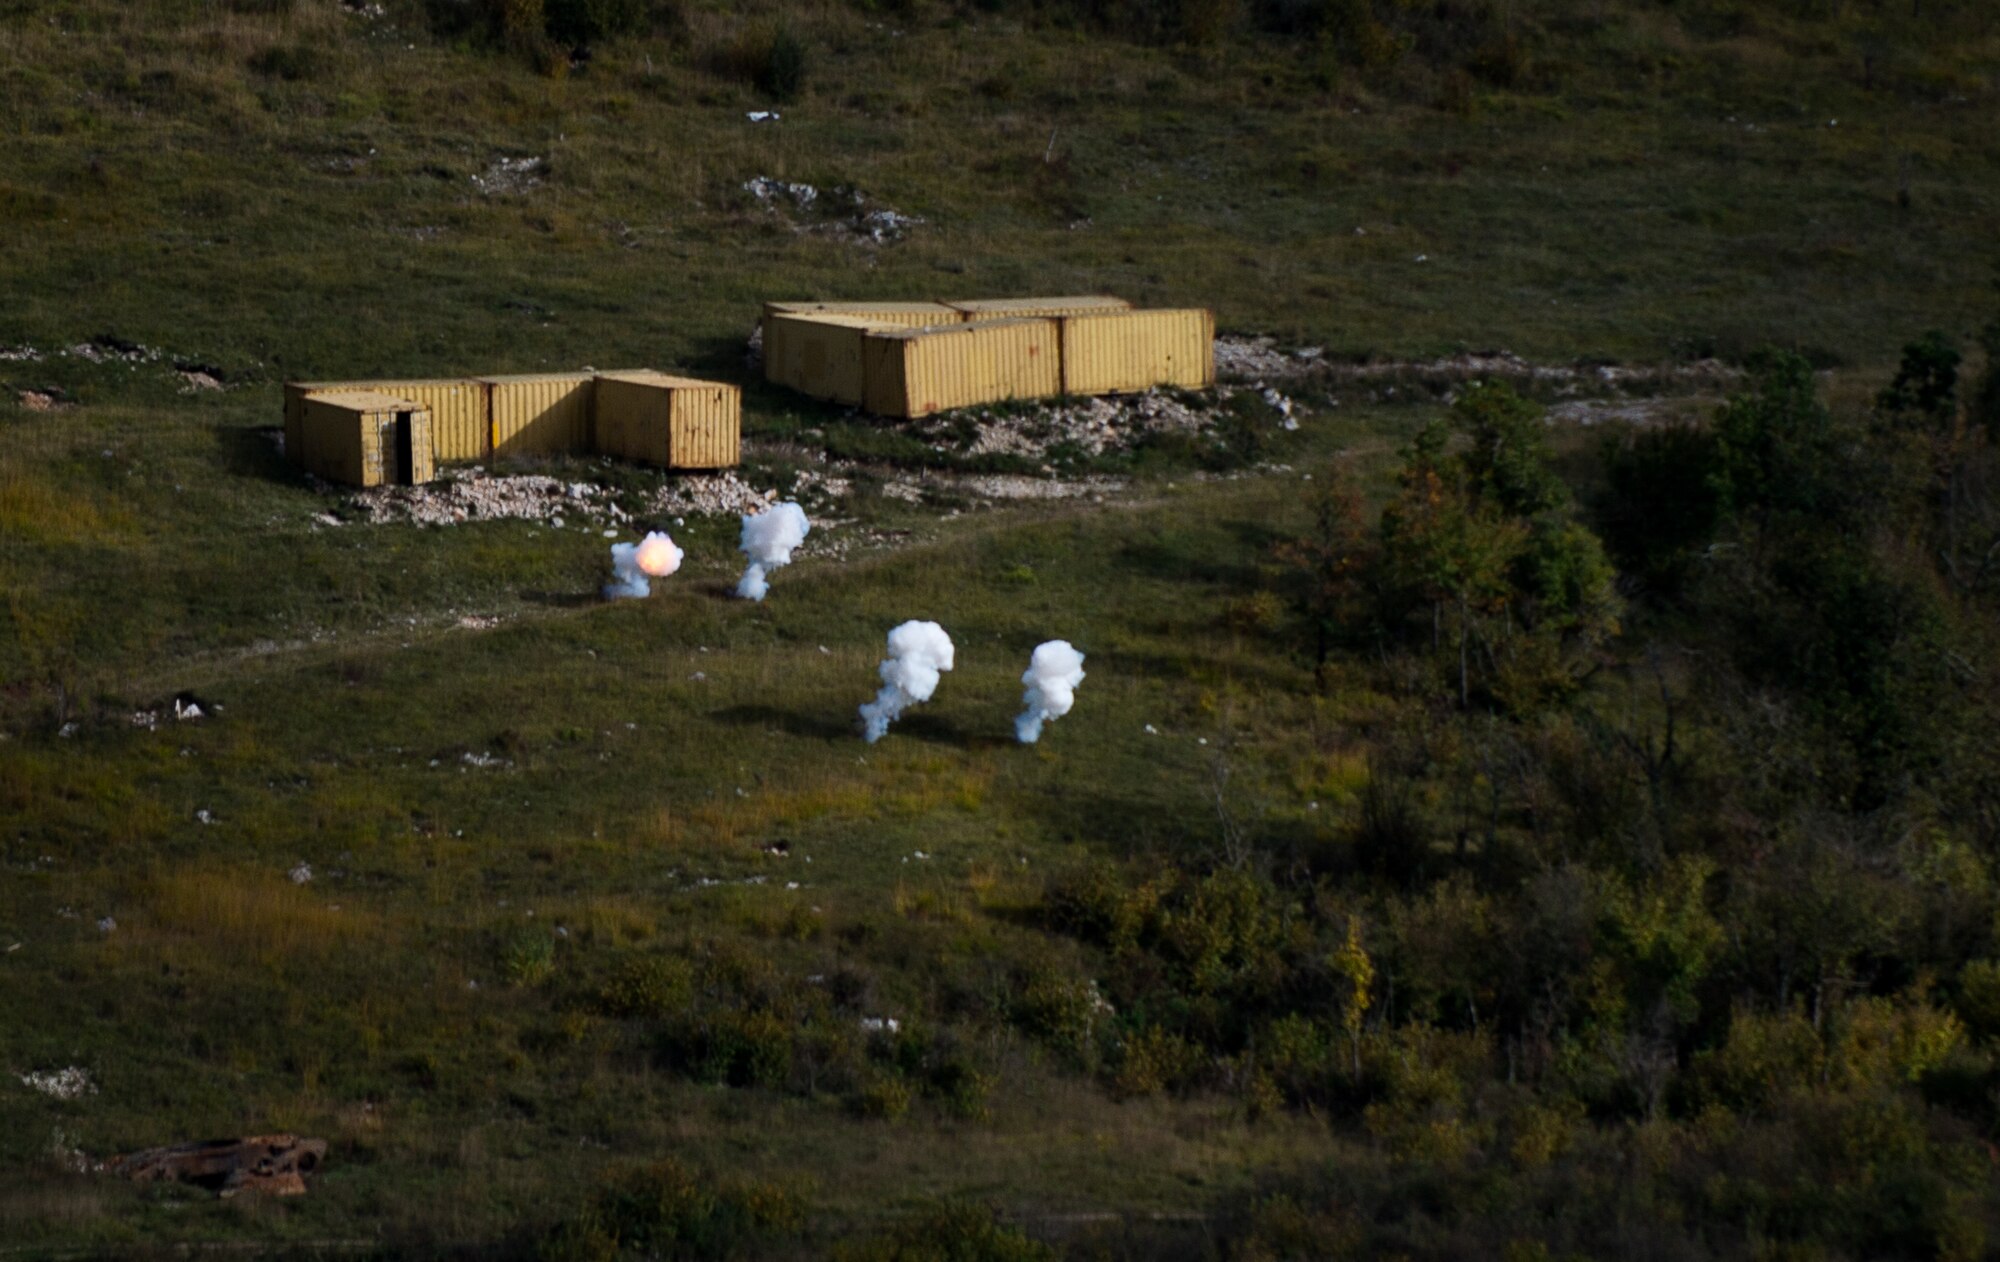 Bombs dropped from a Slovenian PC-9M Hudournik aircraft explode during live-fire training Oct. 16, 2015, at the Pocek Training Range, near Postojna, Slovenia. The PC-9Ms were controlled by U.S. Air Force joint terminal attack controllers who provided support to U.S. Army units training in the range for exercise Rock Proof V. (U.S. Air Force photo/Staff Sgt. Armando A. Schwier-Morales)